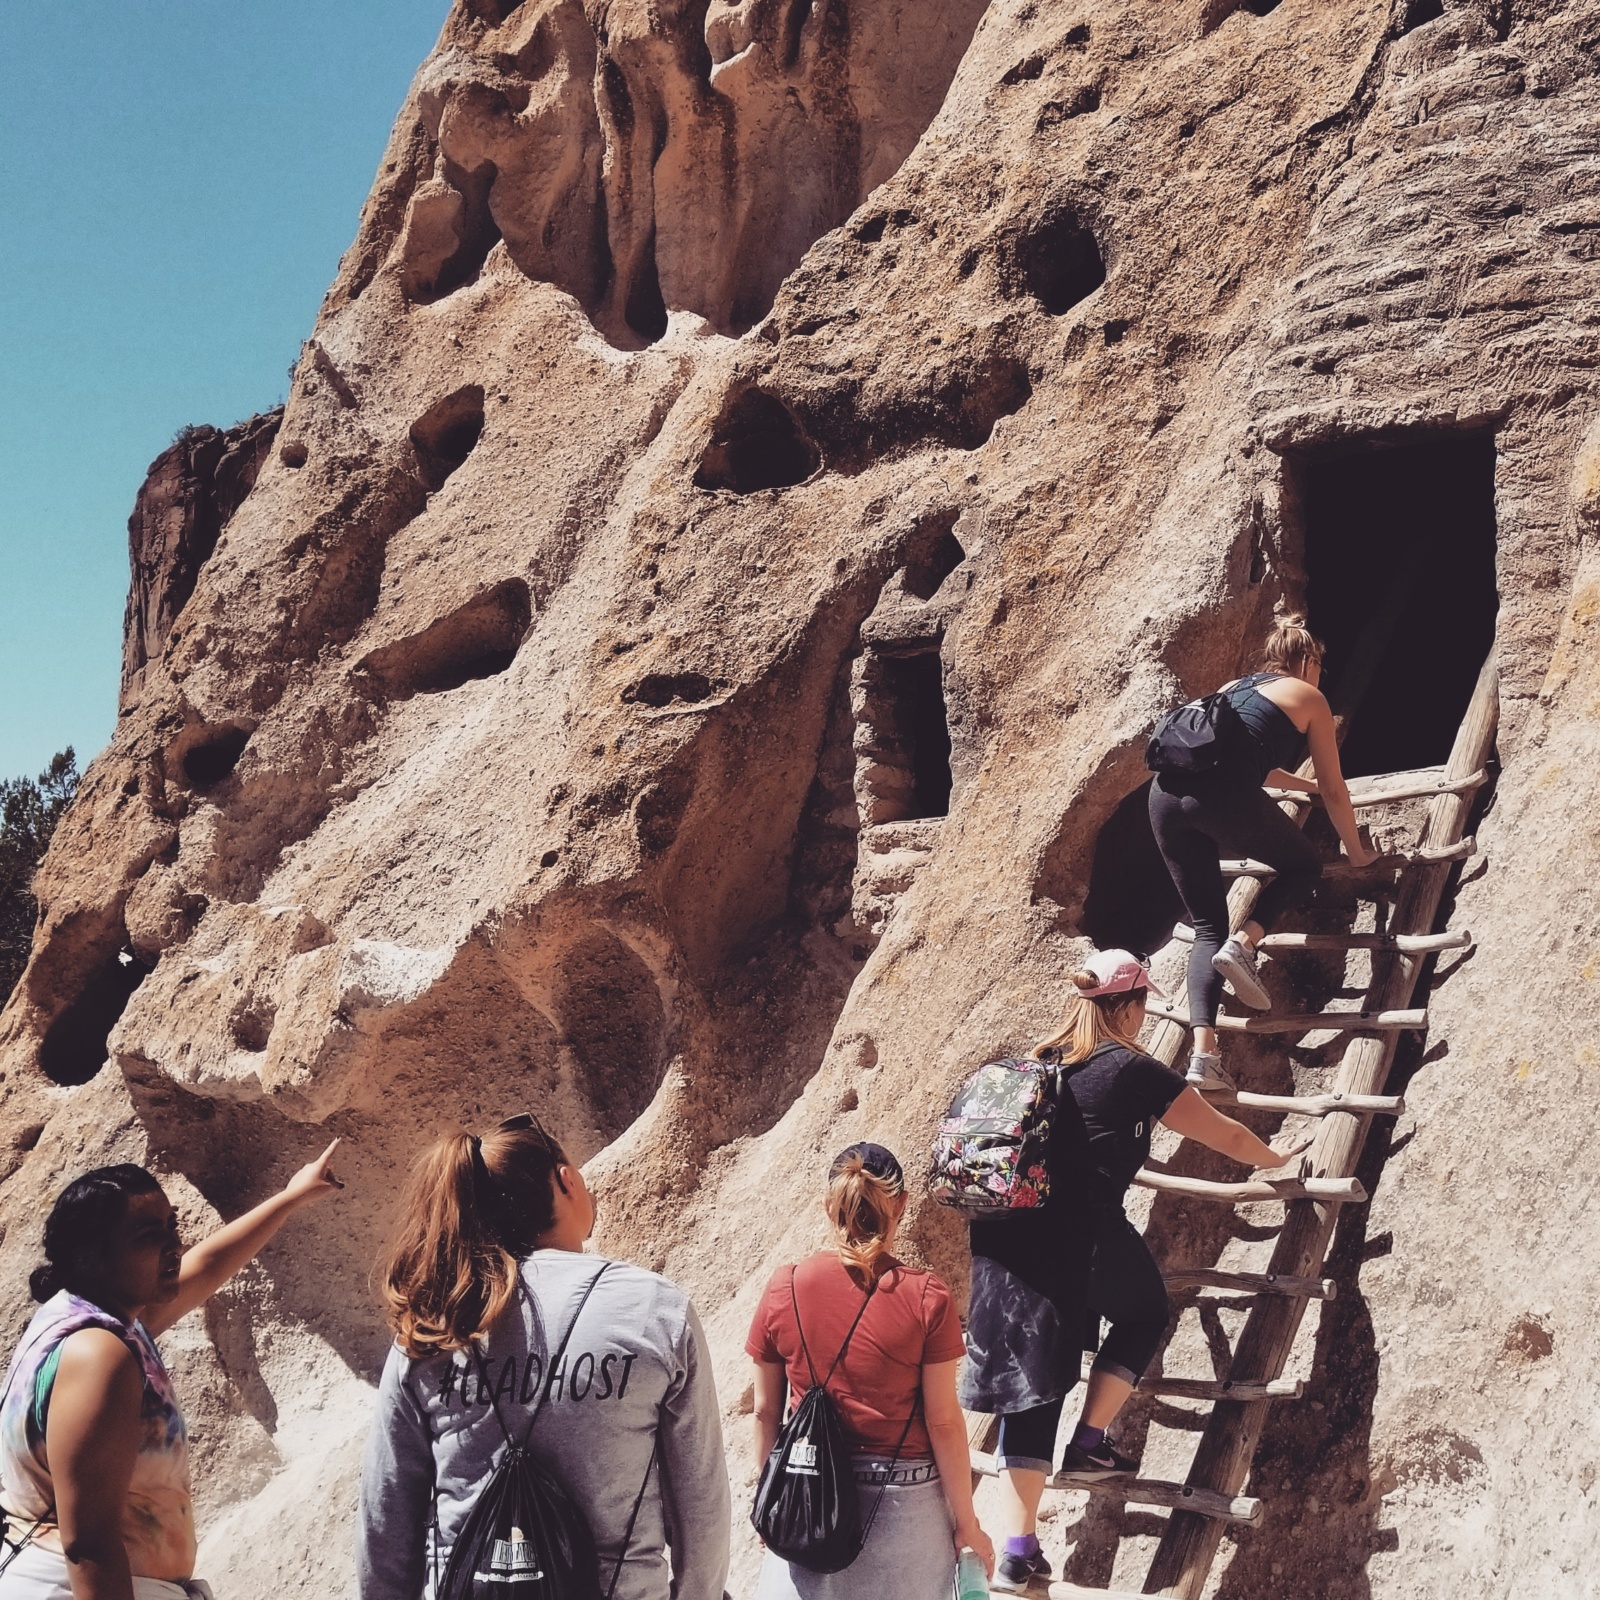 Guests climb up the ancient ladders at Bandelier National Monument outside of Santa Fe, New Mexico.